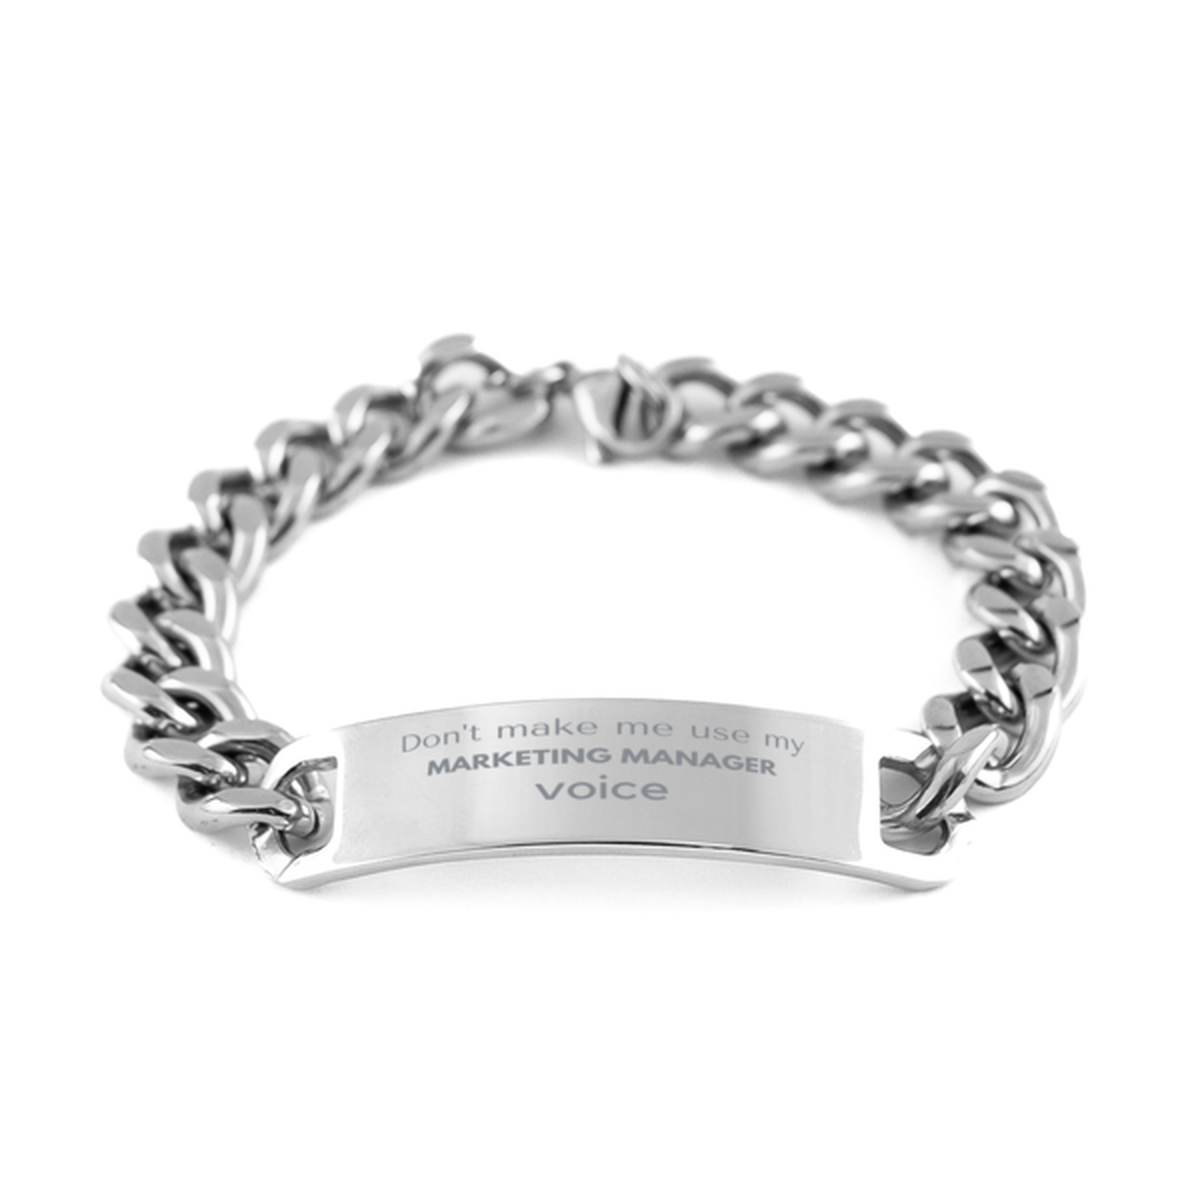 Don't make me use my Marketing Manager voice, Sarcasm Marketing Manager Gifts, Christmas Marketing Manager Cuban Chain Stainless Steel Bracelet Birthday Unique Gifts For Marketing Manager Coworkers, Men, Women, Colleague, Friends